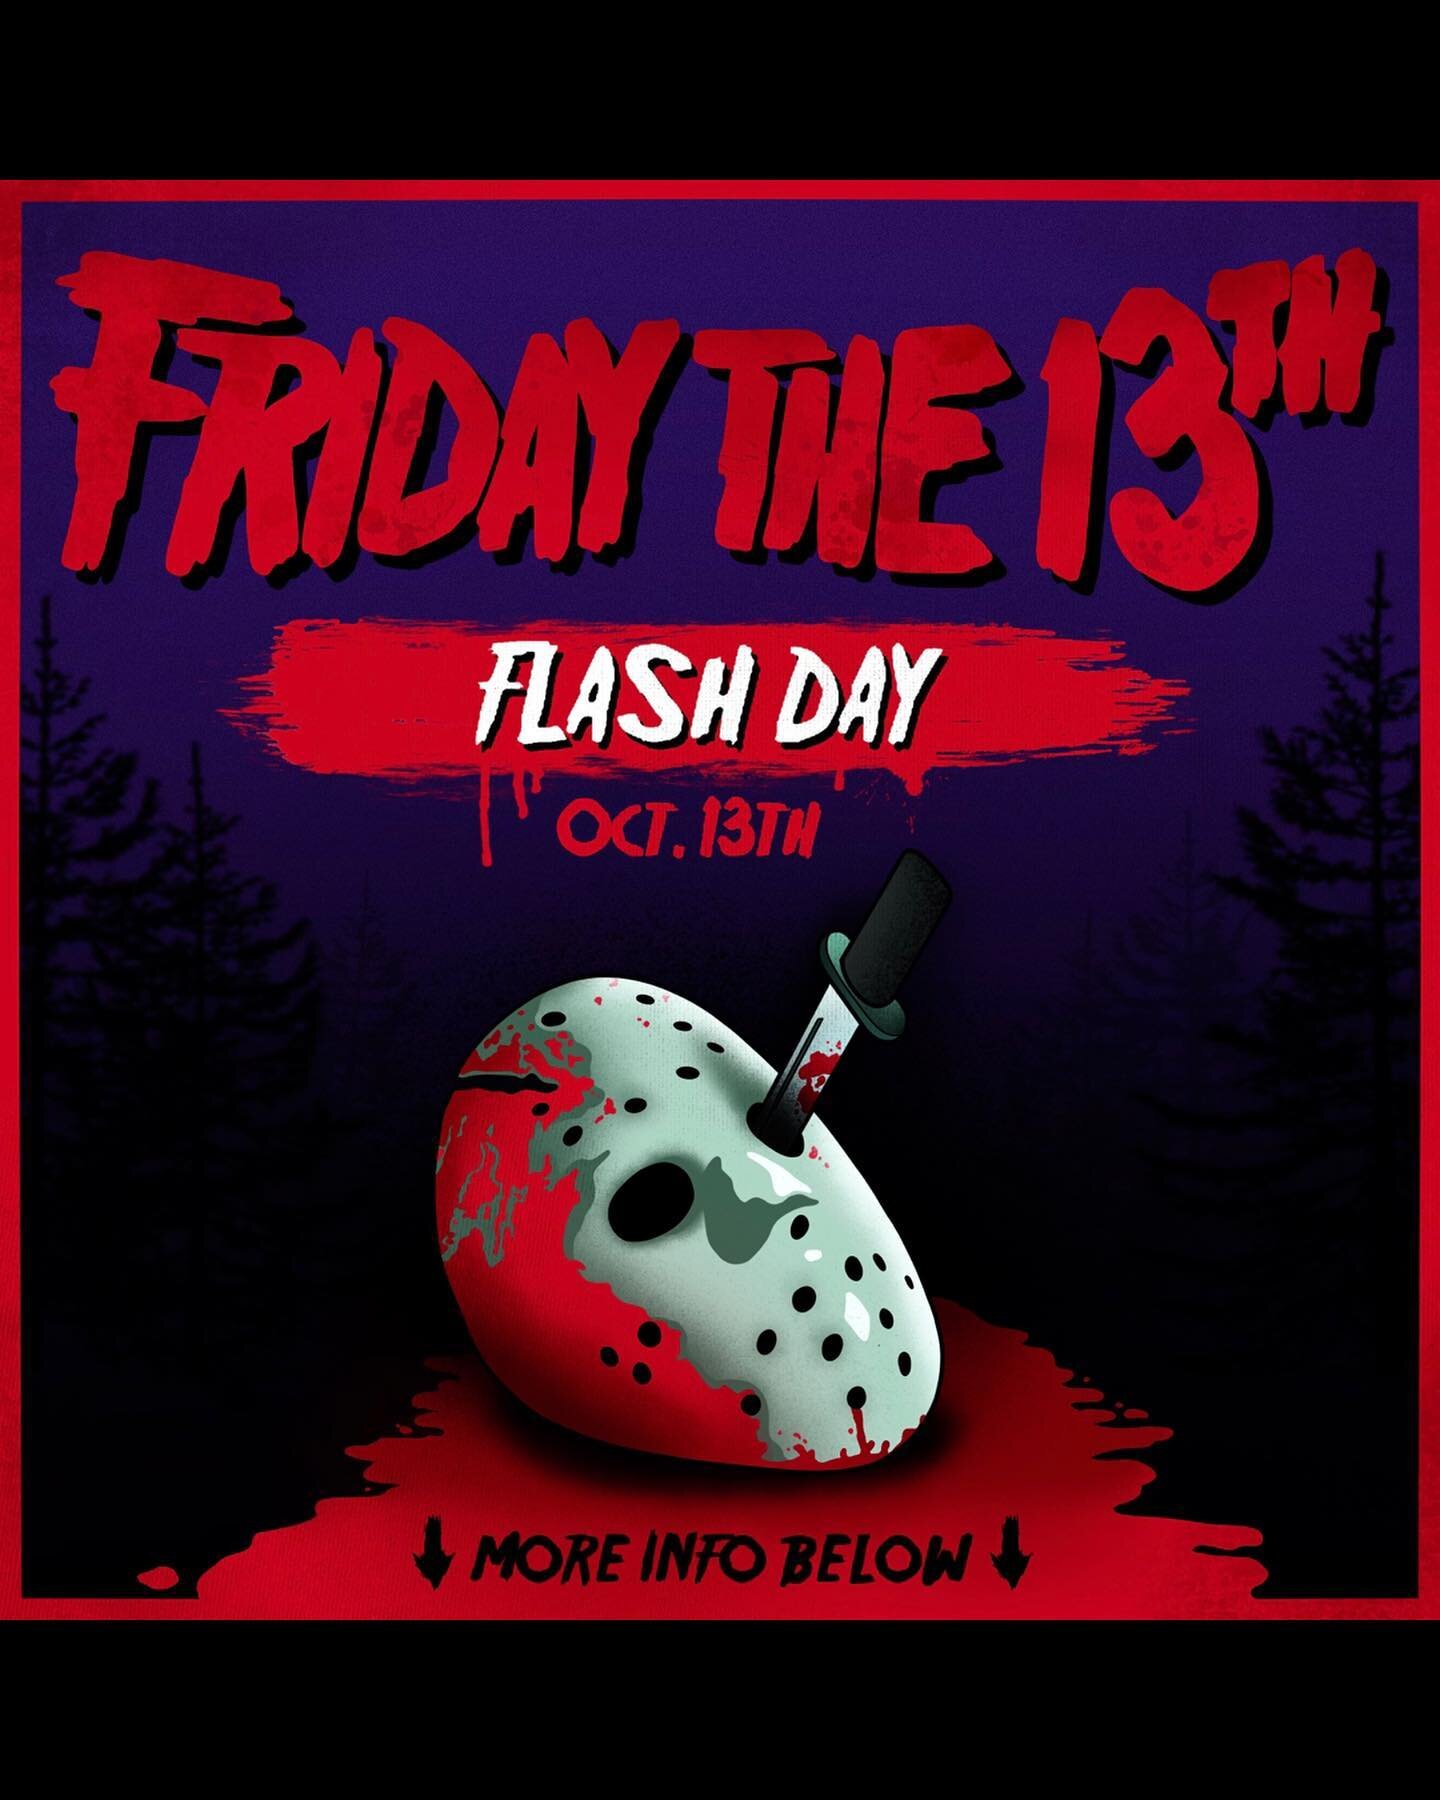 !!FRIDAY OCTOBER 13th!!
Our biggest flash event of the year! Halloween themed designs will be available for viewing on 10/10. $113 2.5x2.5 inch in approximate size. Piercing specials! First come first serve! 12-8pm Must be 18 to enter, no exceptions.